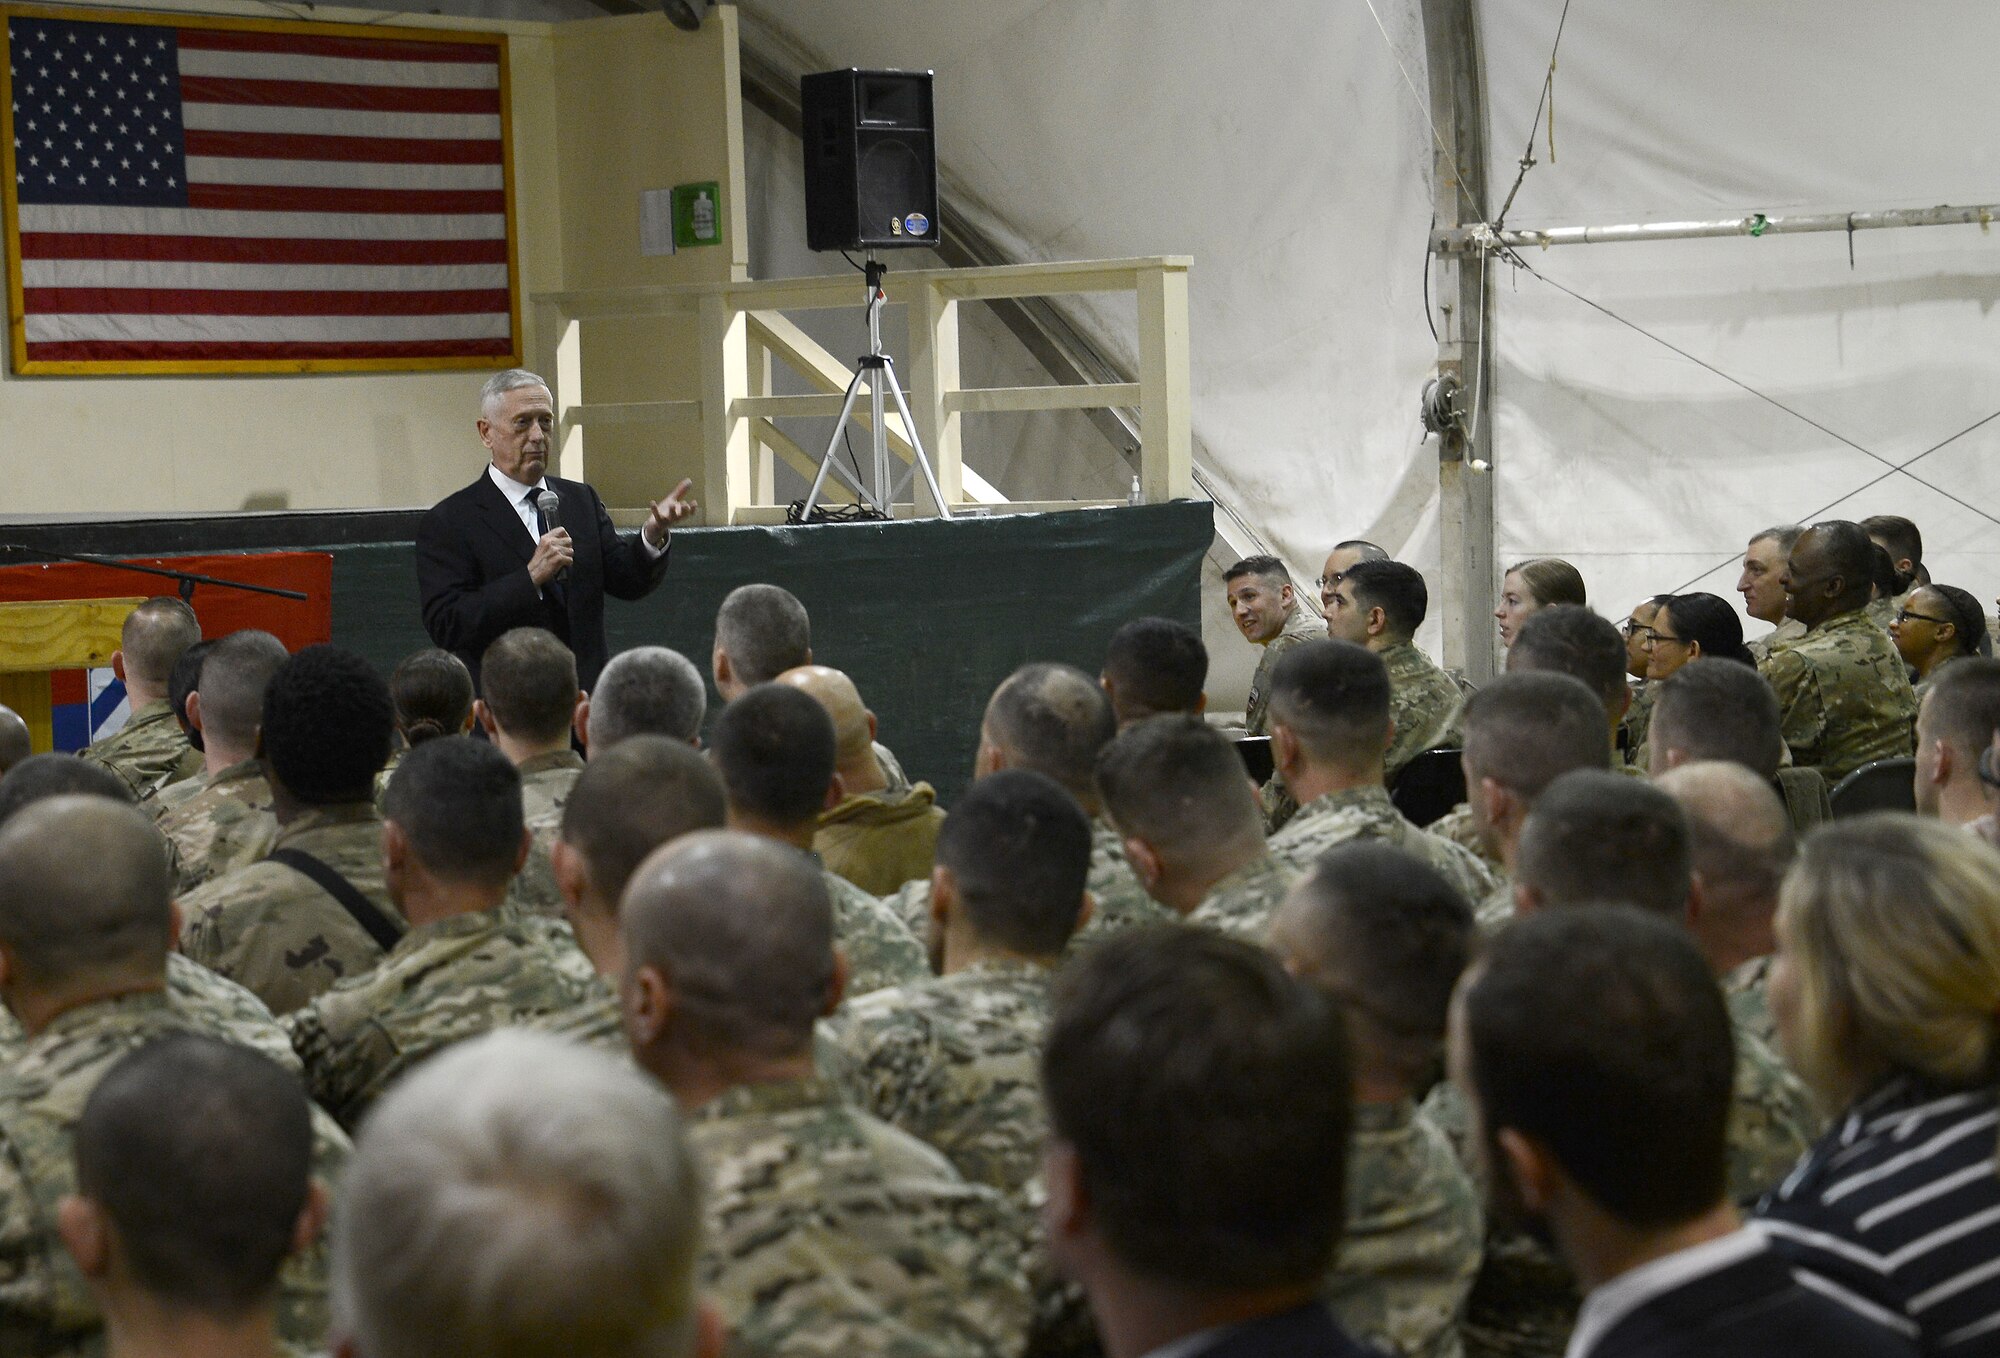 James Mattis, U.S. Secretary of Defense, conducts an all call with the men and women of Bagram Airfield, Afghanistan on Mar. 14, 2018.